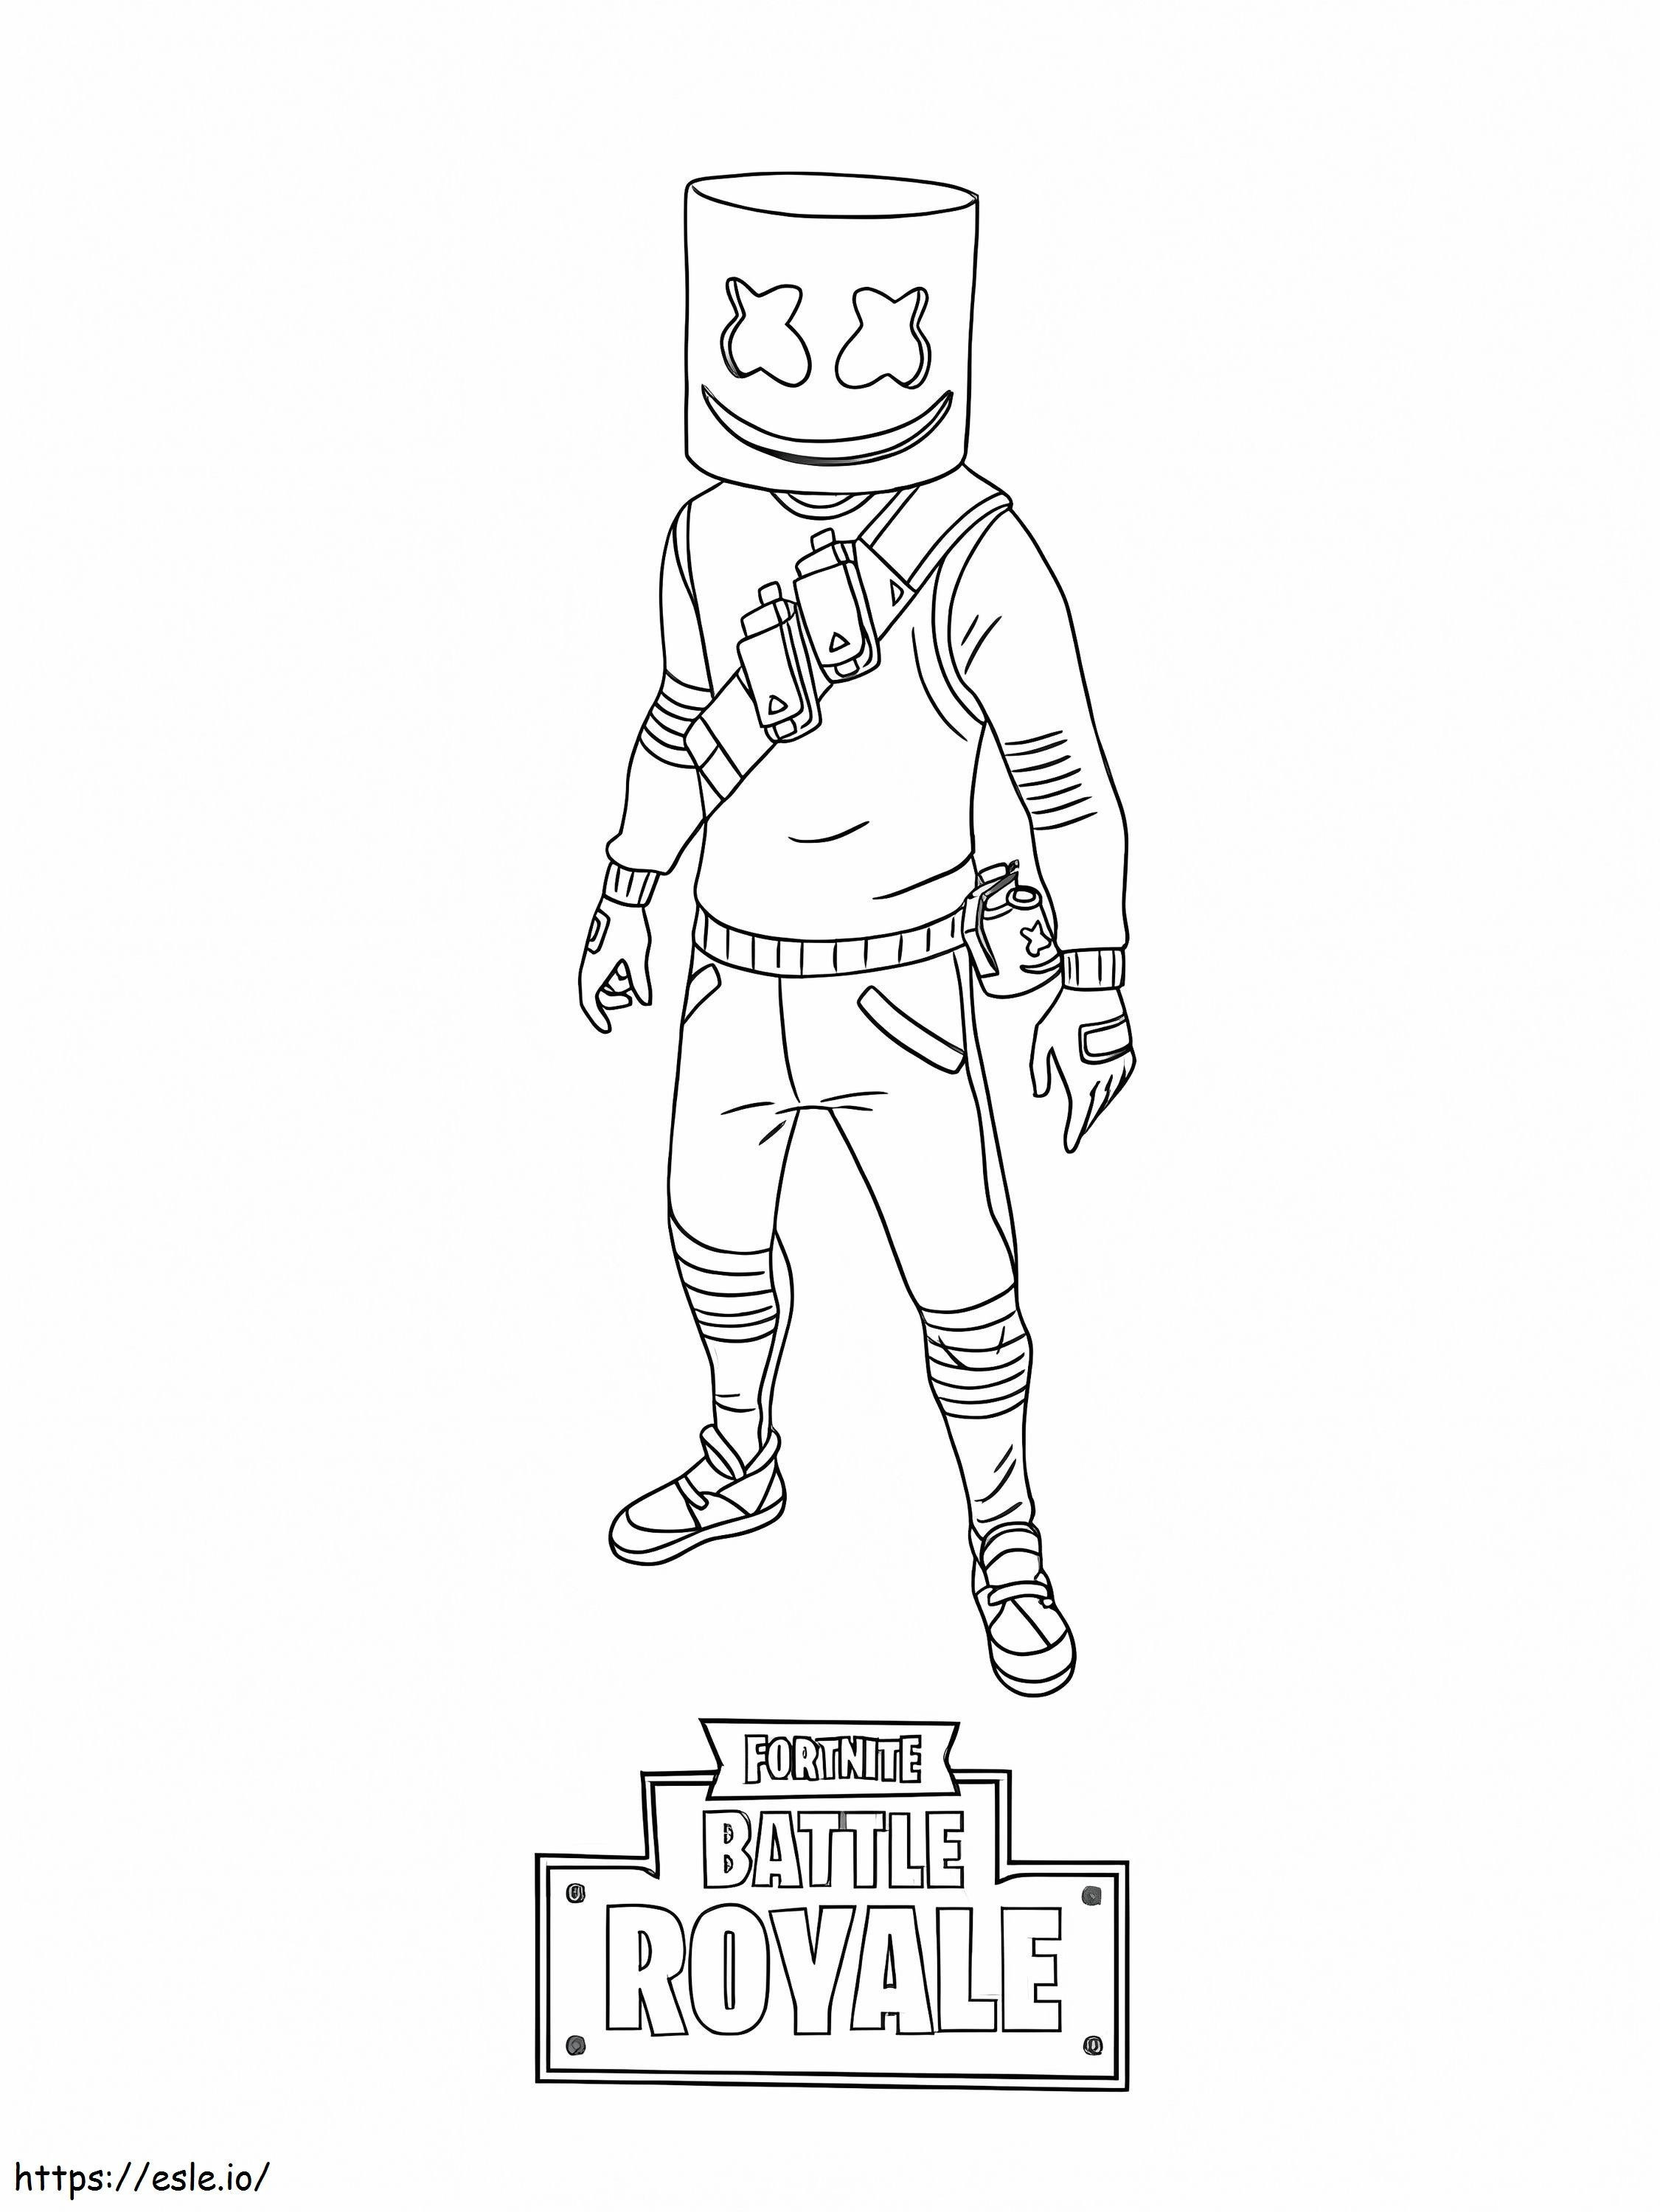 Marshmello 3 coloring page